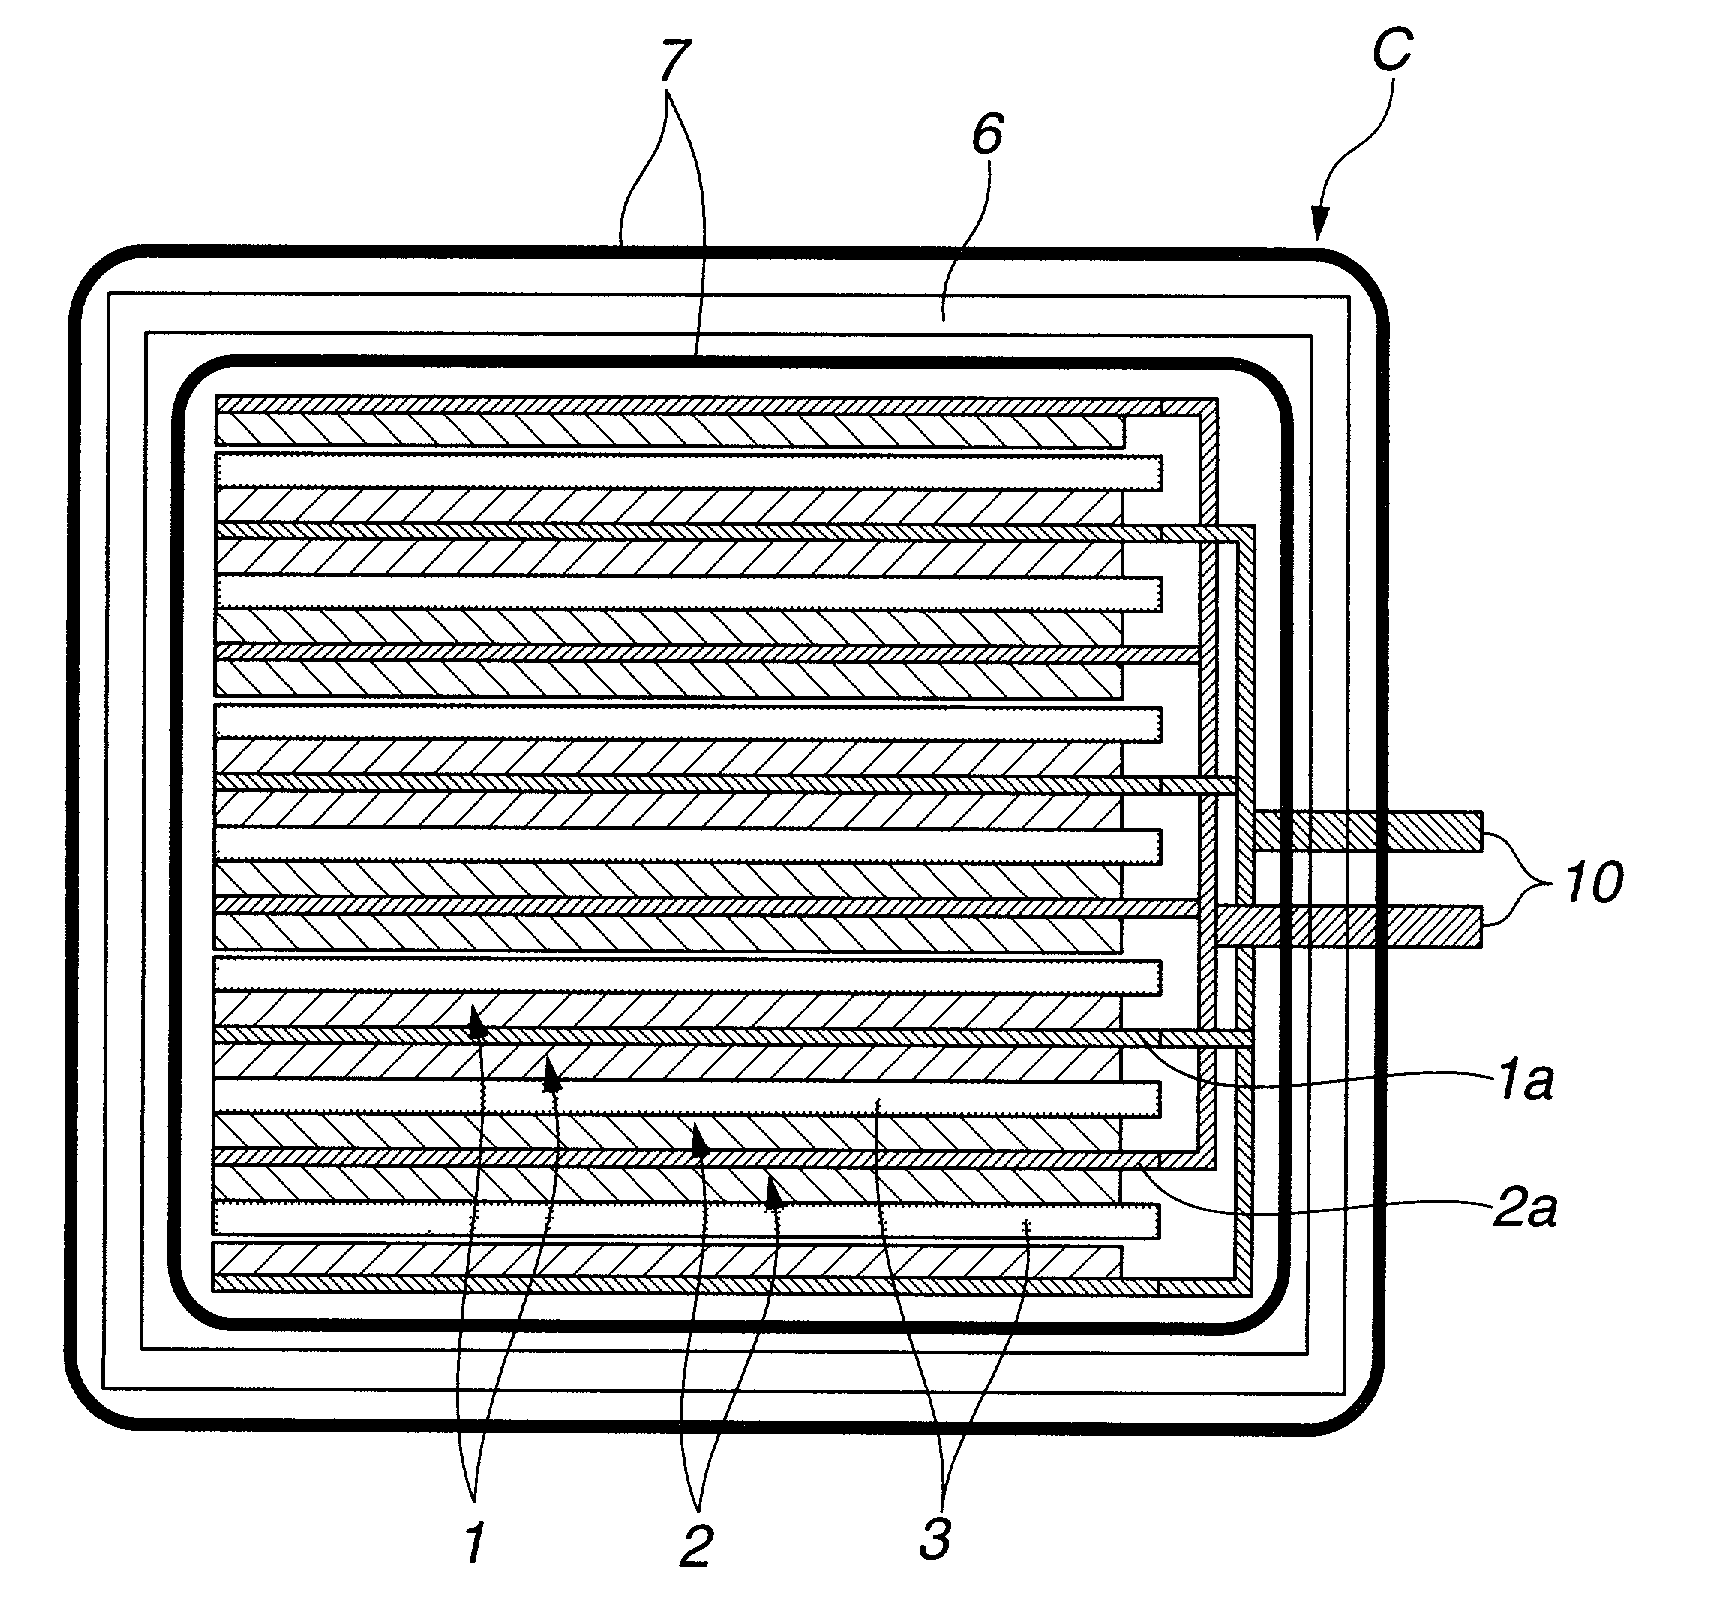 Lithium-based battery having extensible, ion-impermeable polymer covering on the battery container